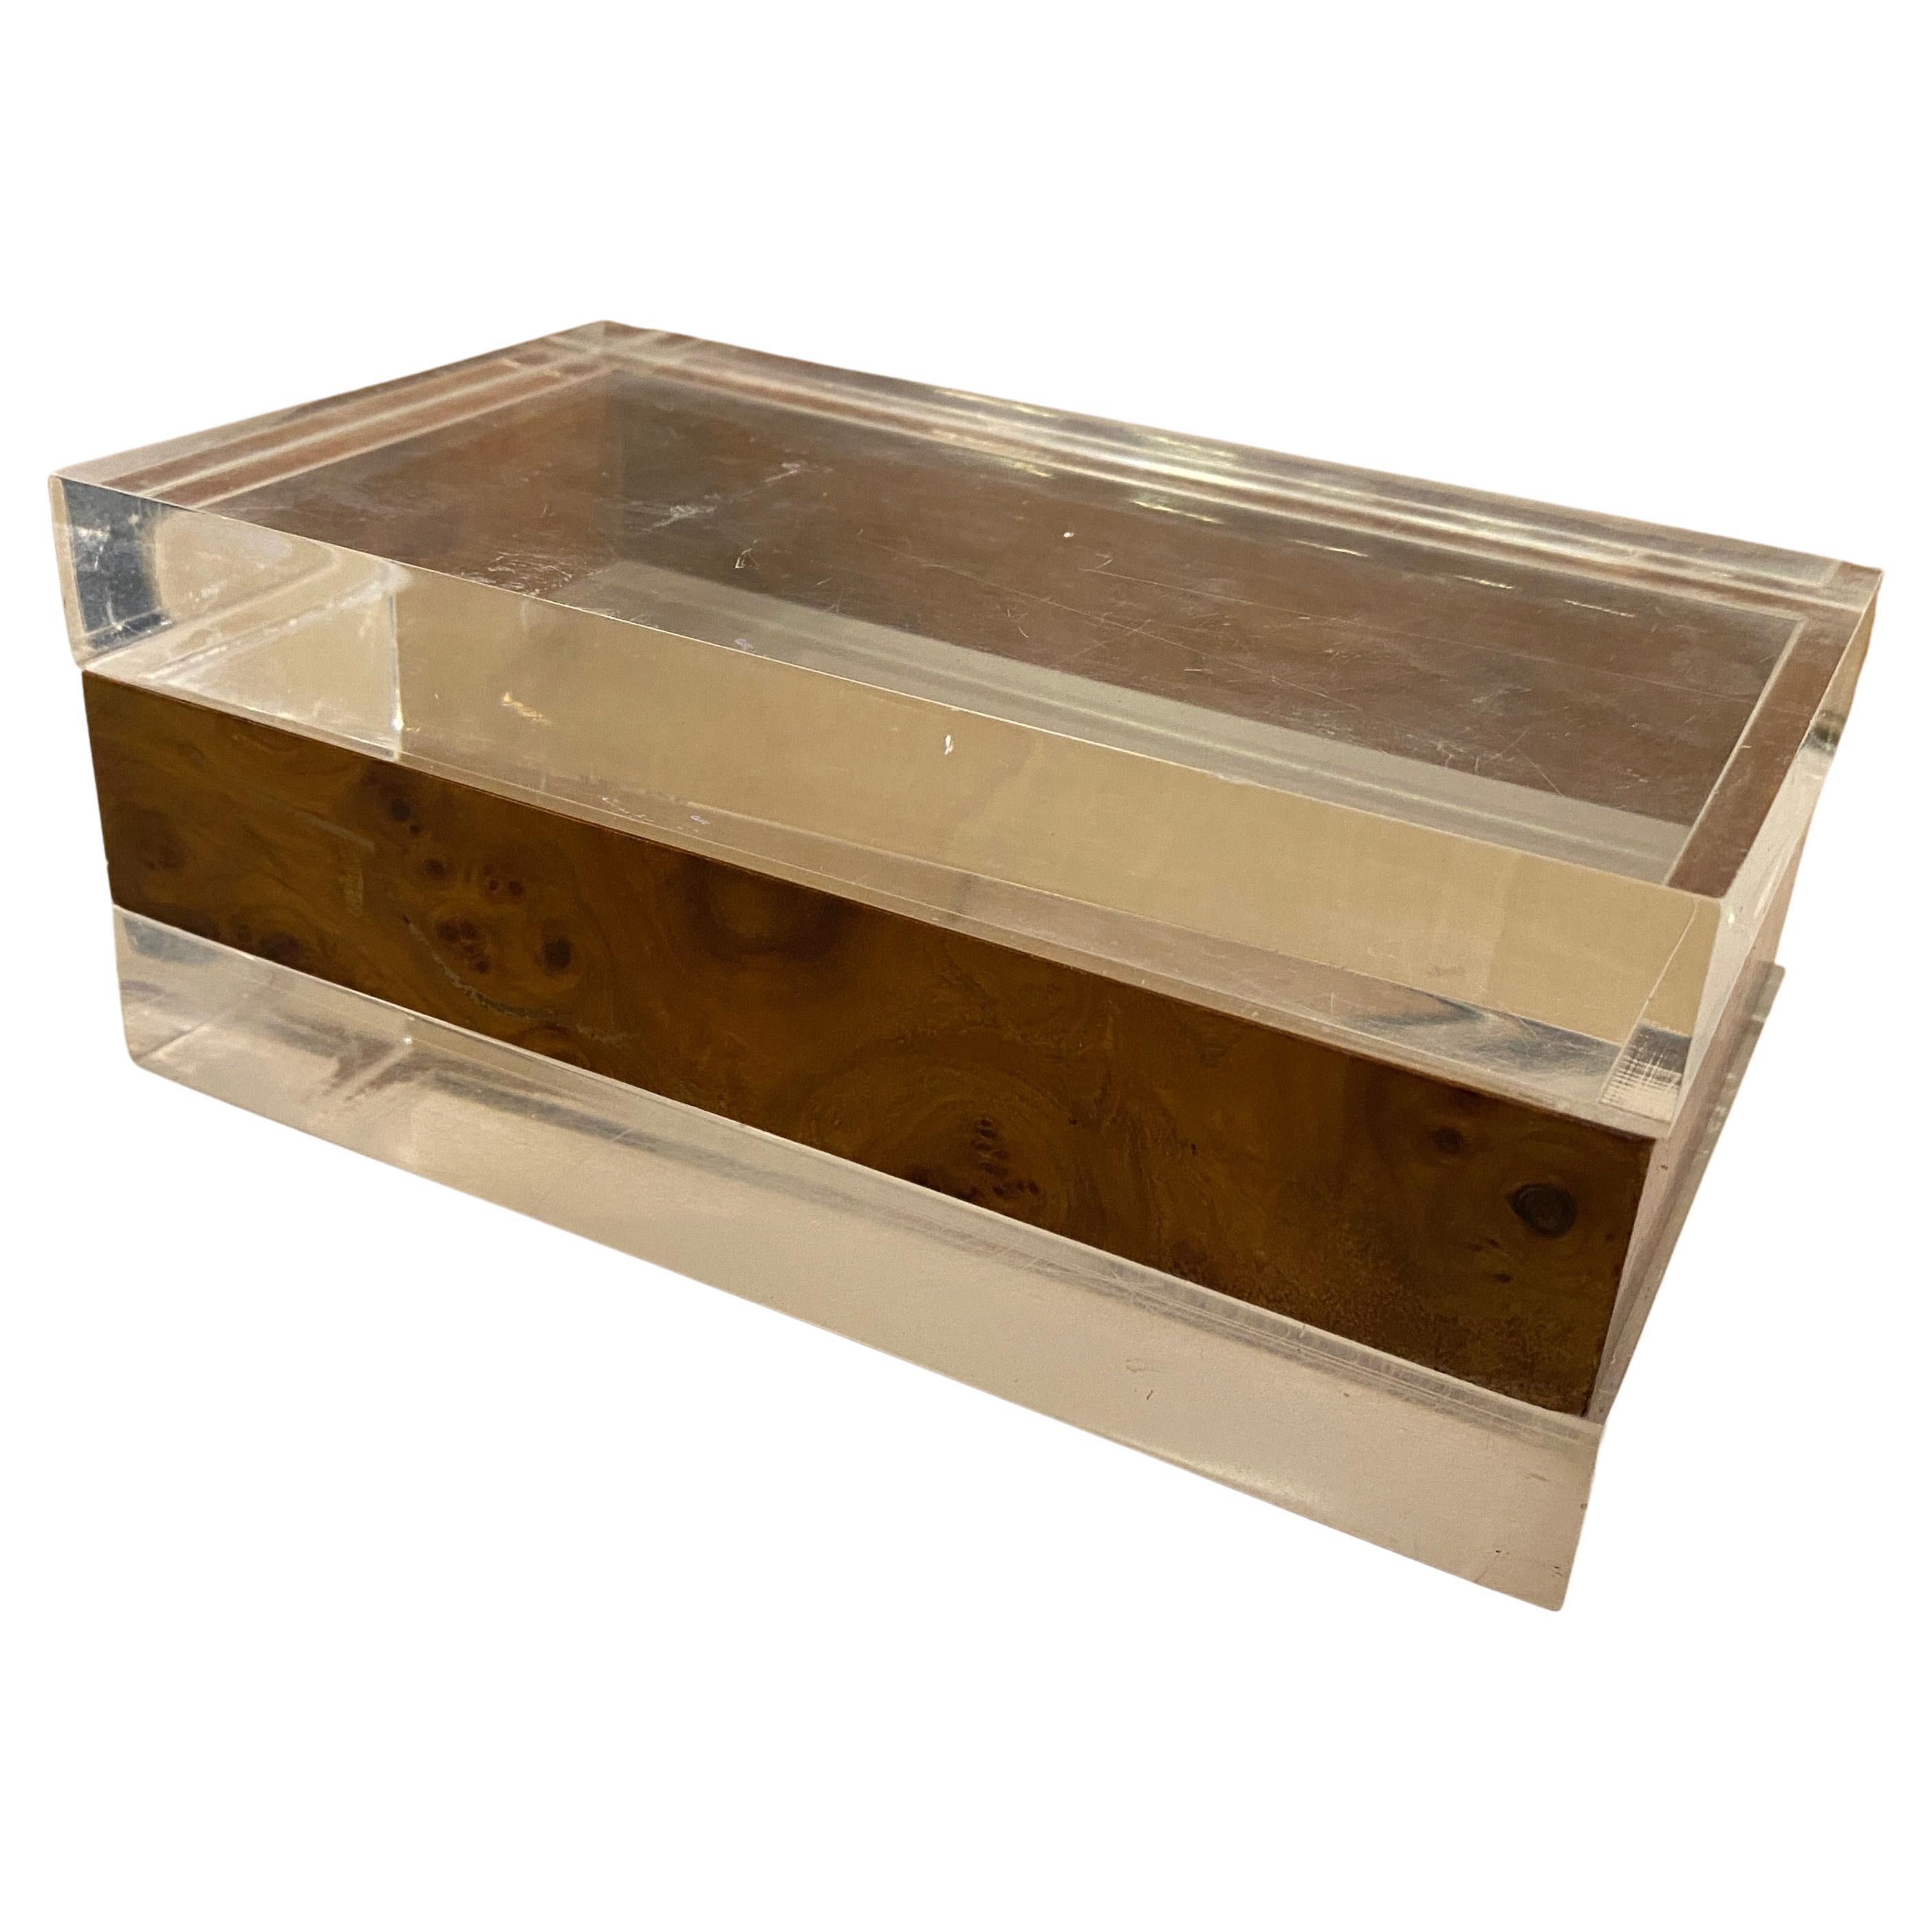 An high quality plexiglass and walnut root jewelry box designed and manufactured in Italy in the Eighties in the manner of Gabriella Crespi. The box it's in very good conditions, just normal signs of use and age. This Italian Box embodies the era's